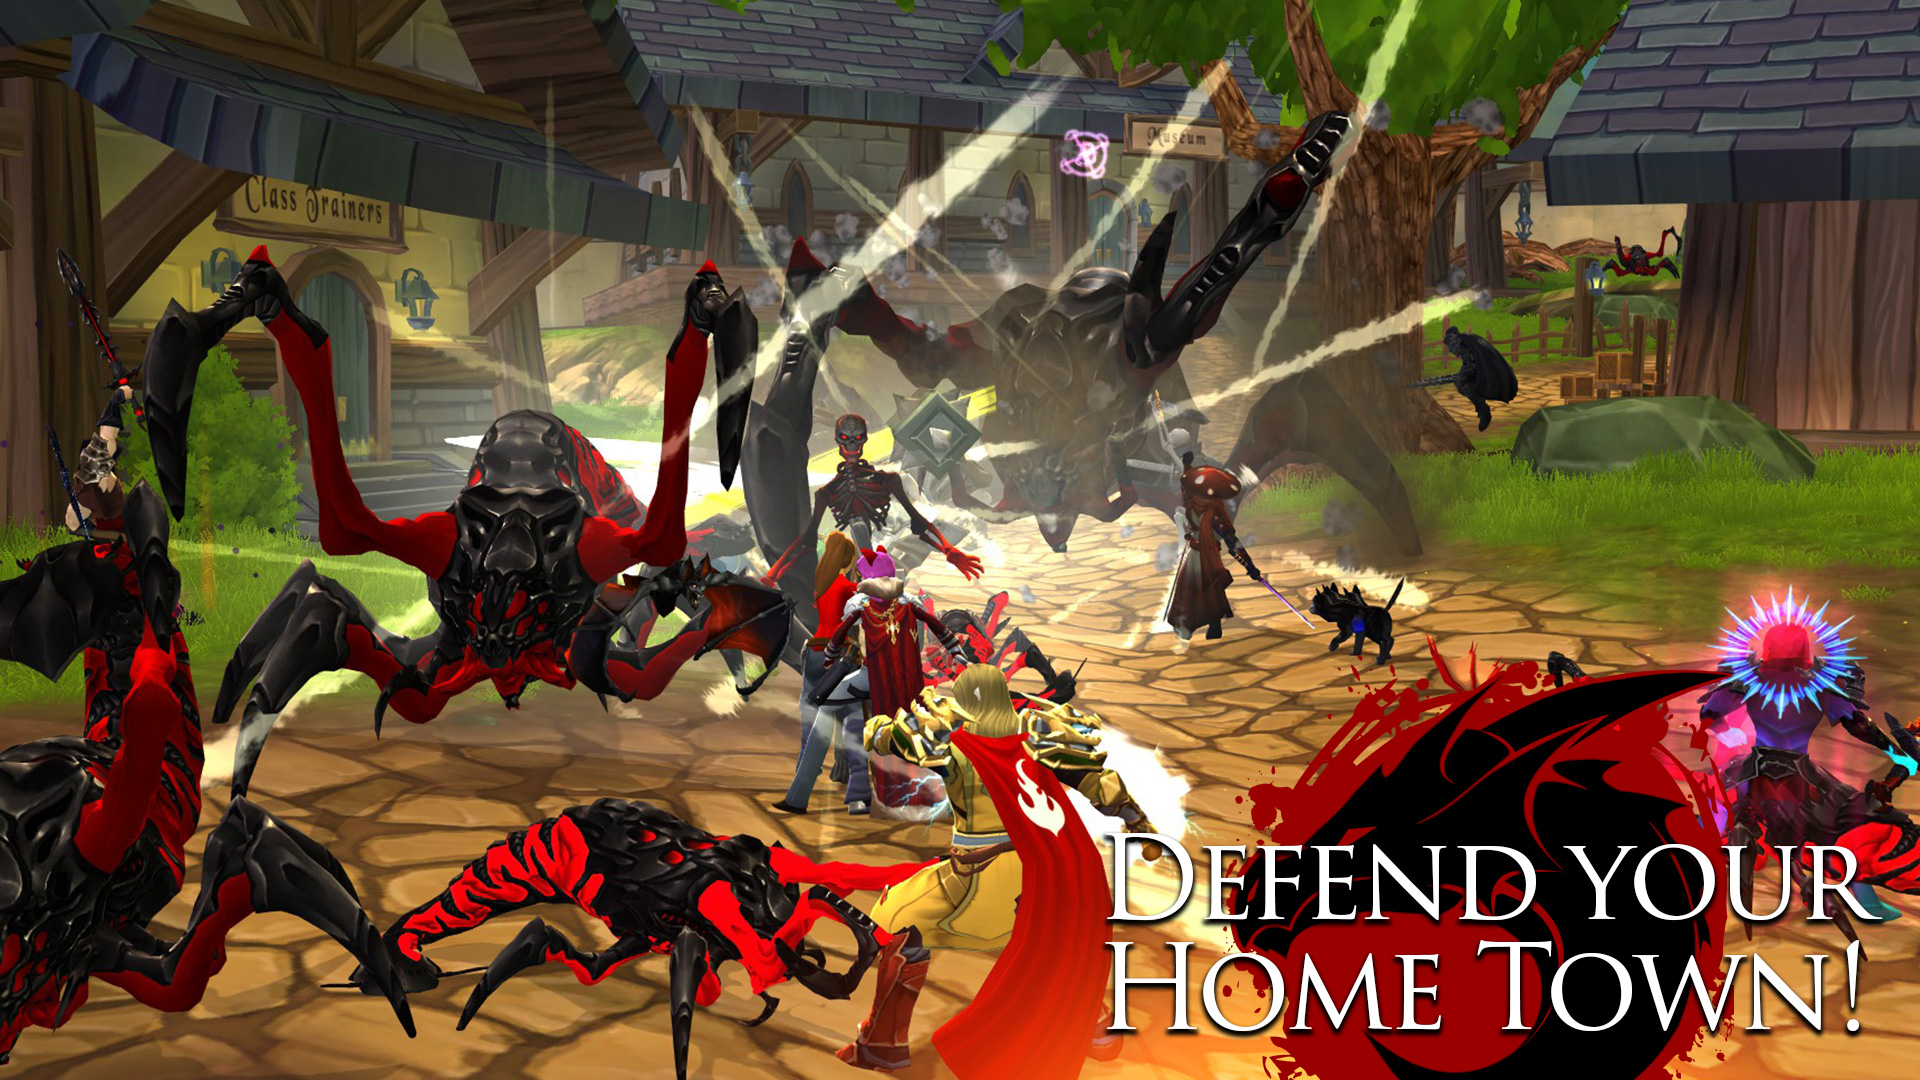 Defend the town of Battleon